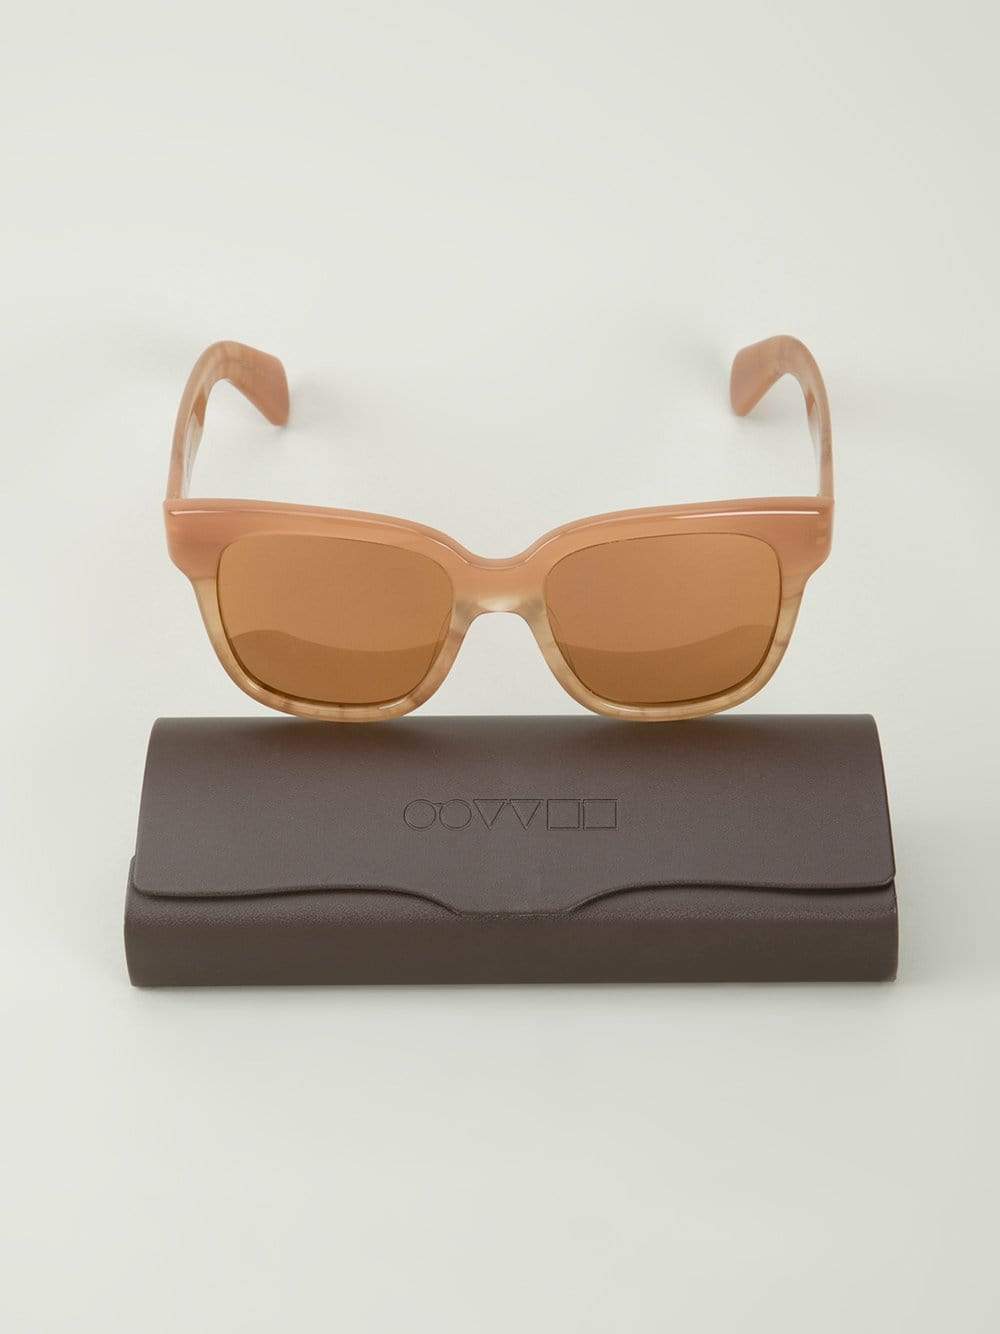 OLIVER PEOPLES-Brinley Sunglasses-TERRACOT